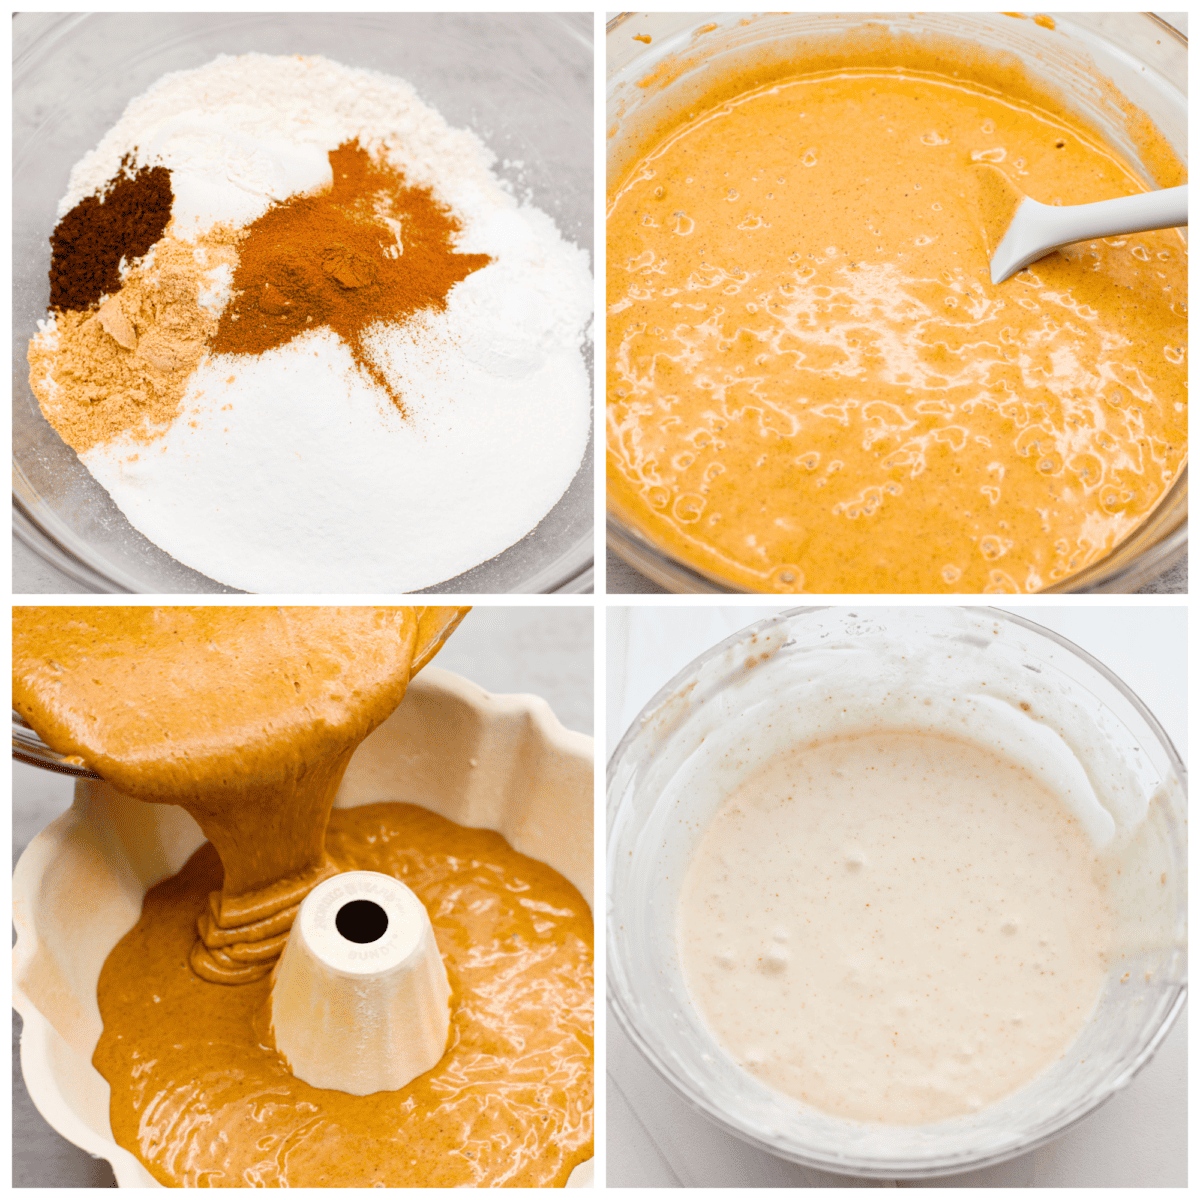 4-photo collage of the cake batter and glaze being prepared.